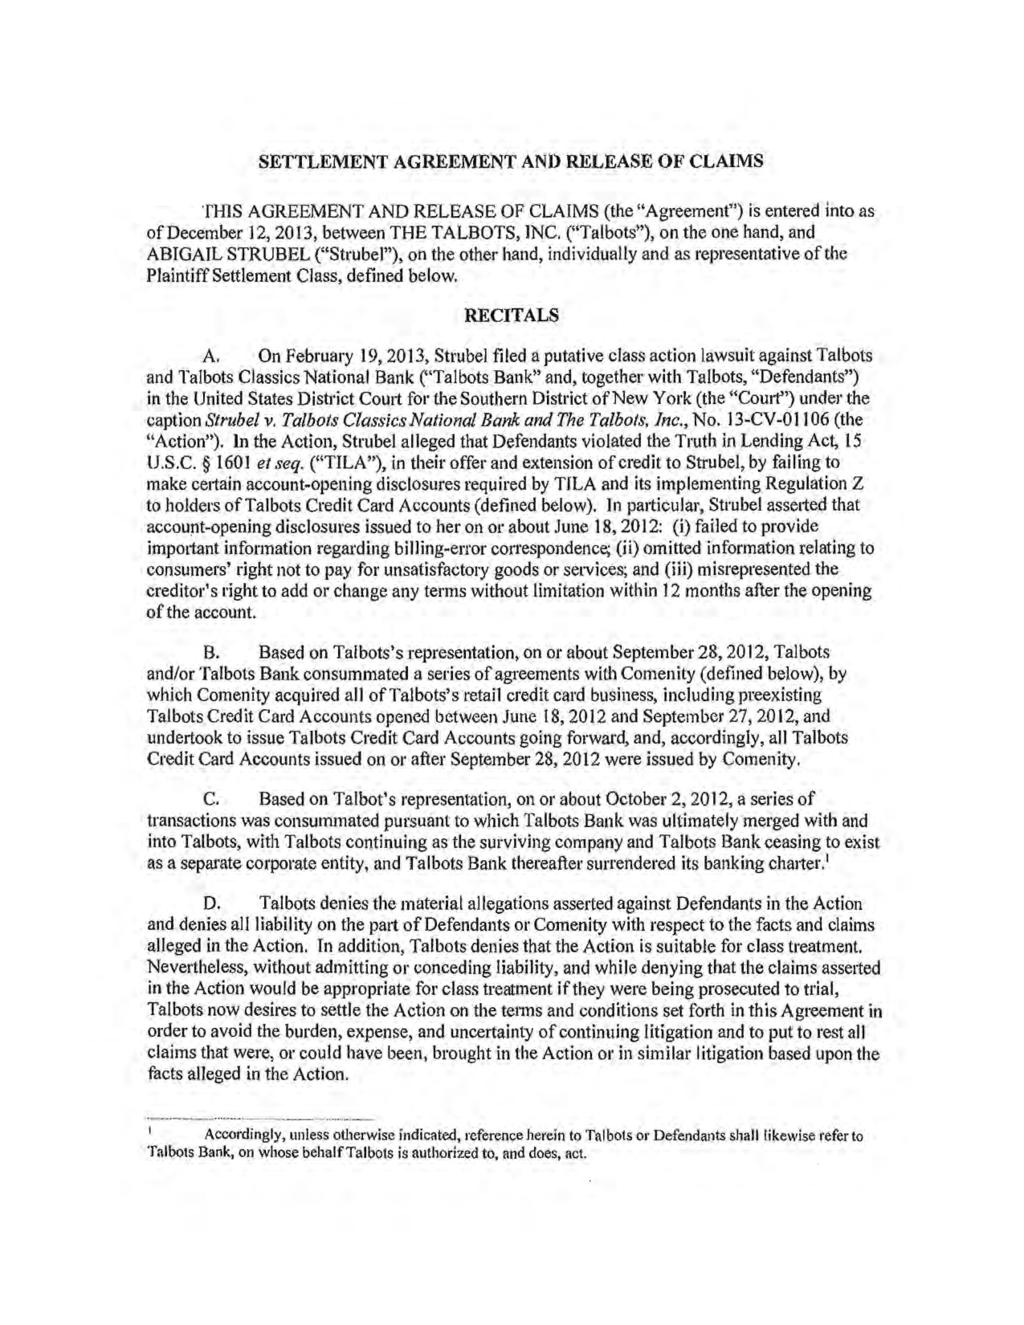 Case 1:13-cv-01106-PAE Document 20-1 Filed 12/20/13 Page 2 of 12 SETTLEMENT AGREEMENT ANO RELEASE OF CLAIMS THIS AGREEMENT AND RELEASE OF CLAIMS (the "Agreement") is entered into as of December 12,